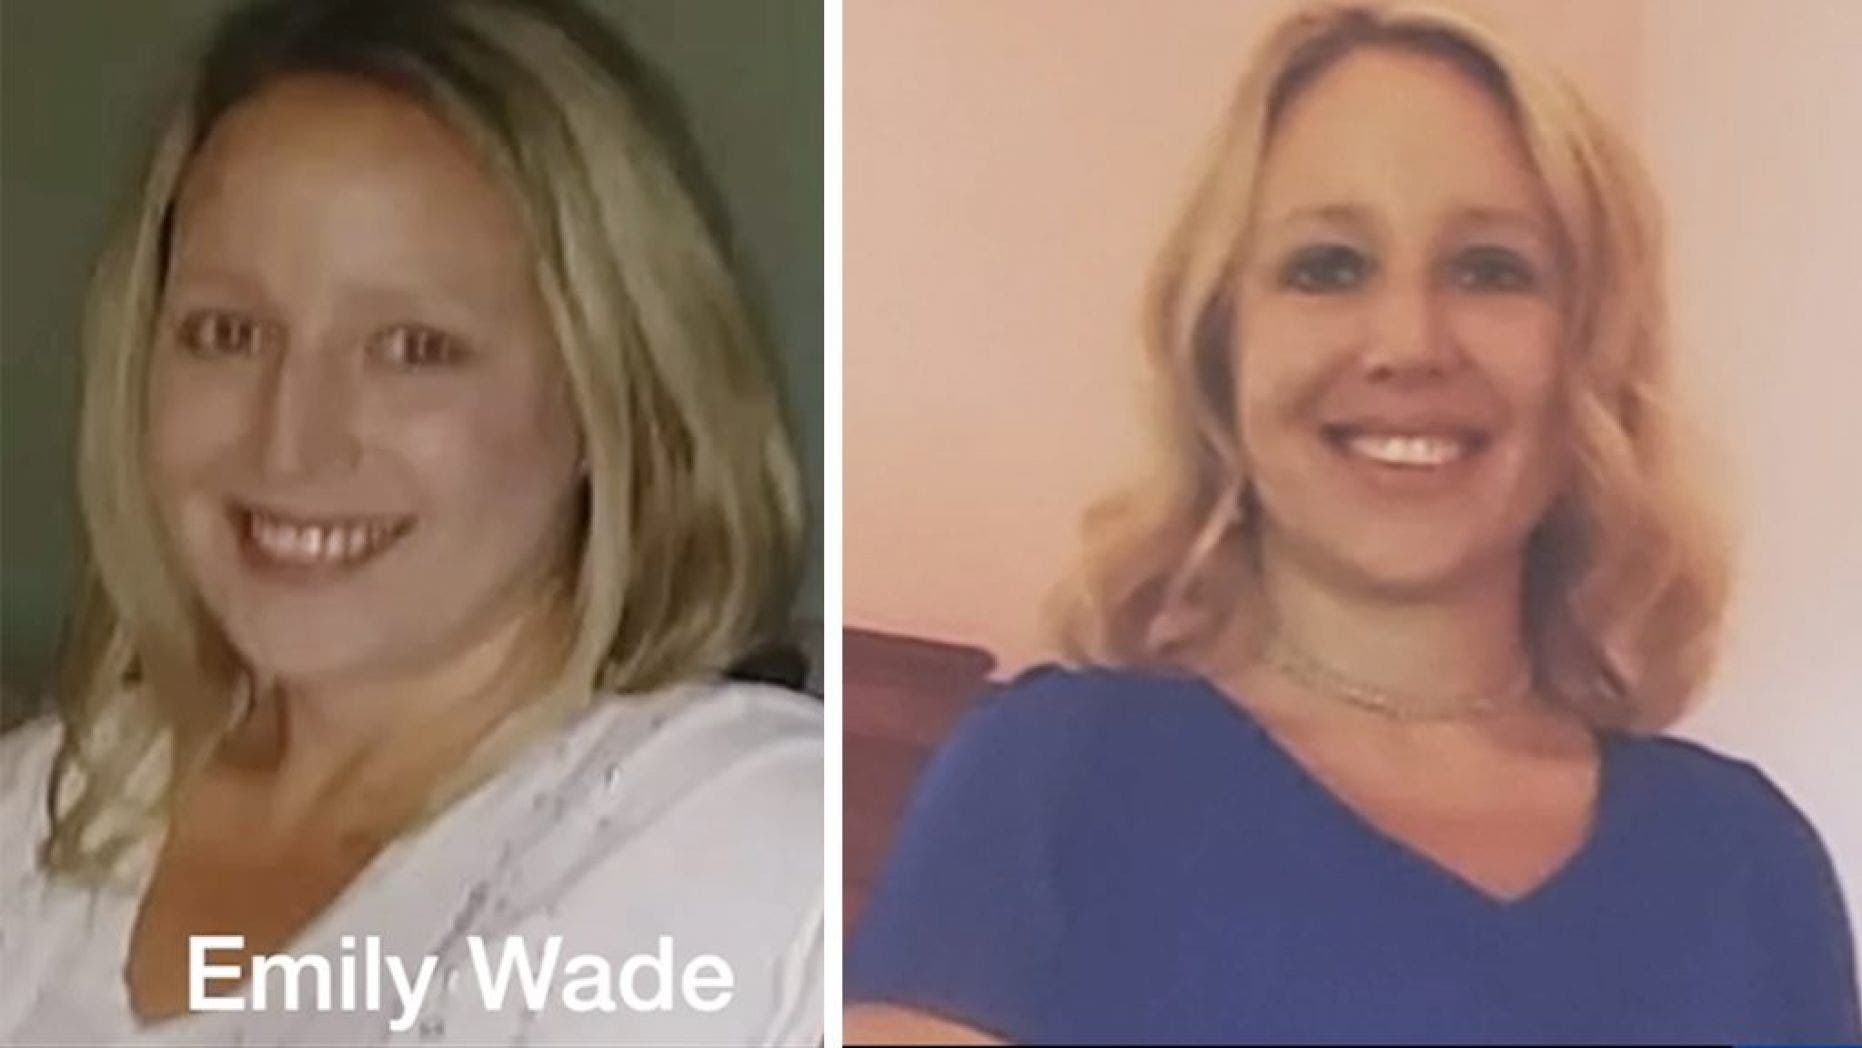 Body found in Texas believed to be missing mom Emily Wade, police say